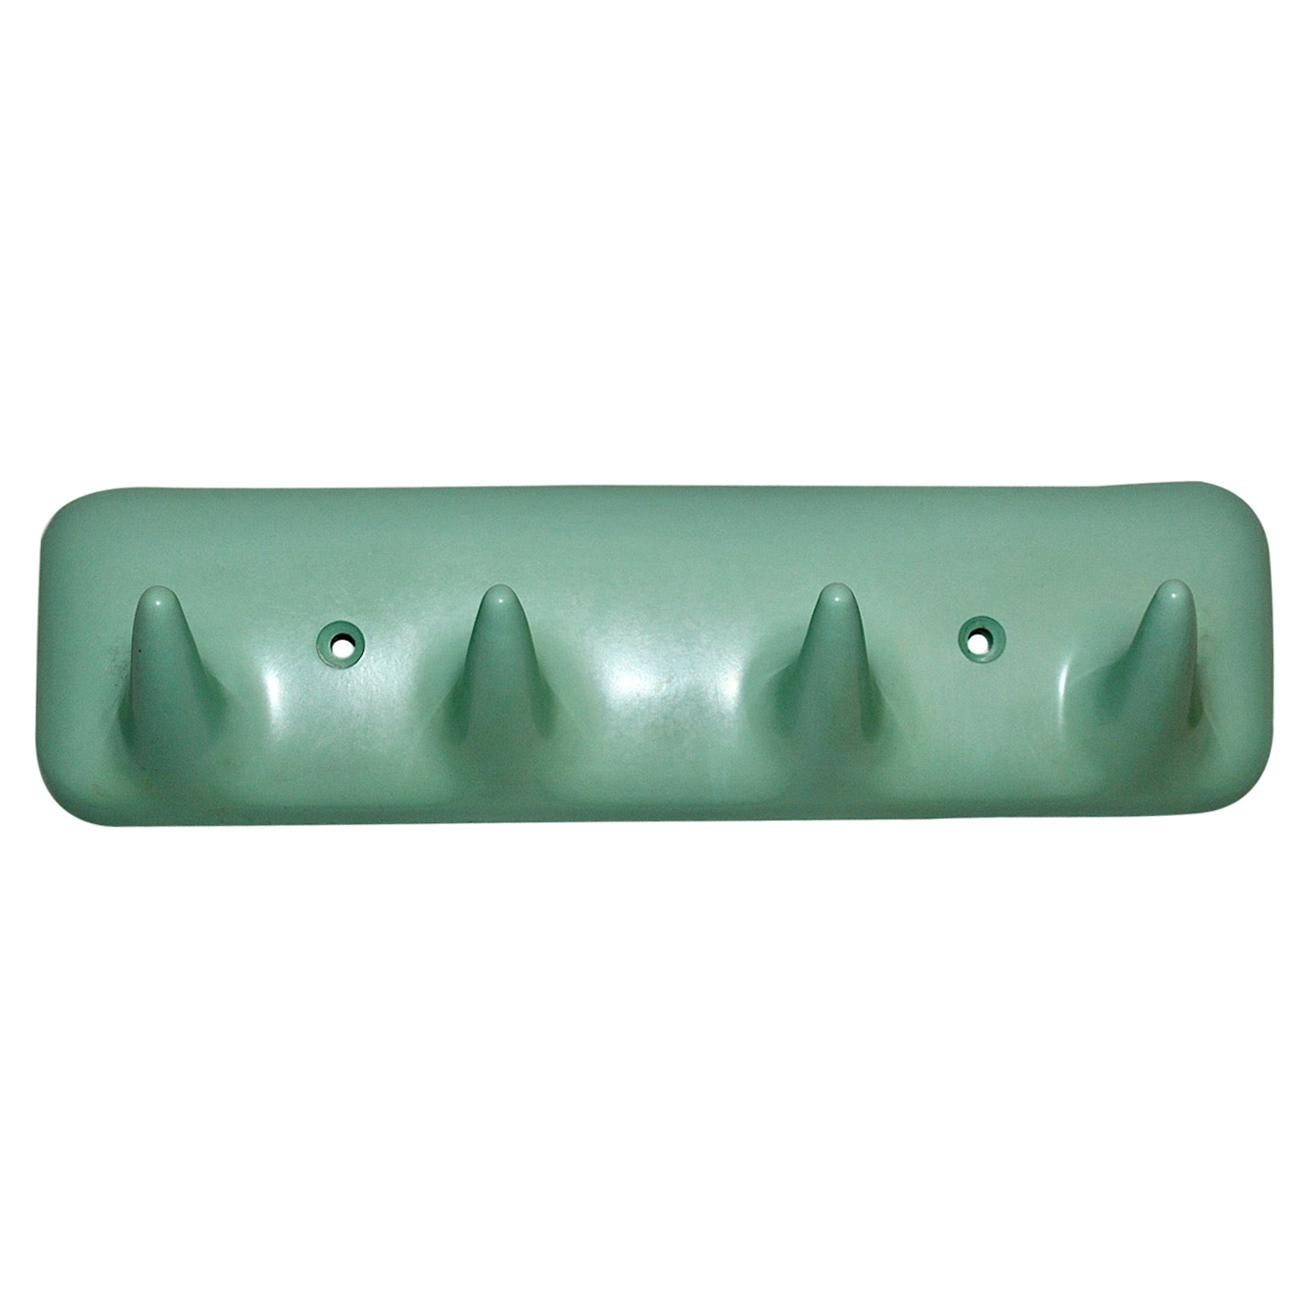 Mid-Century Modern Green Turquoise Plastic Vintage Coat Rack, 1950s, Italy For Sale